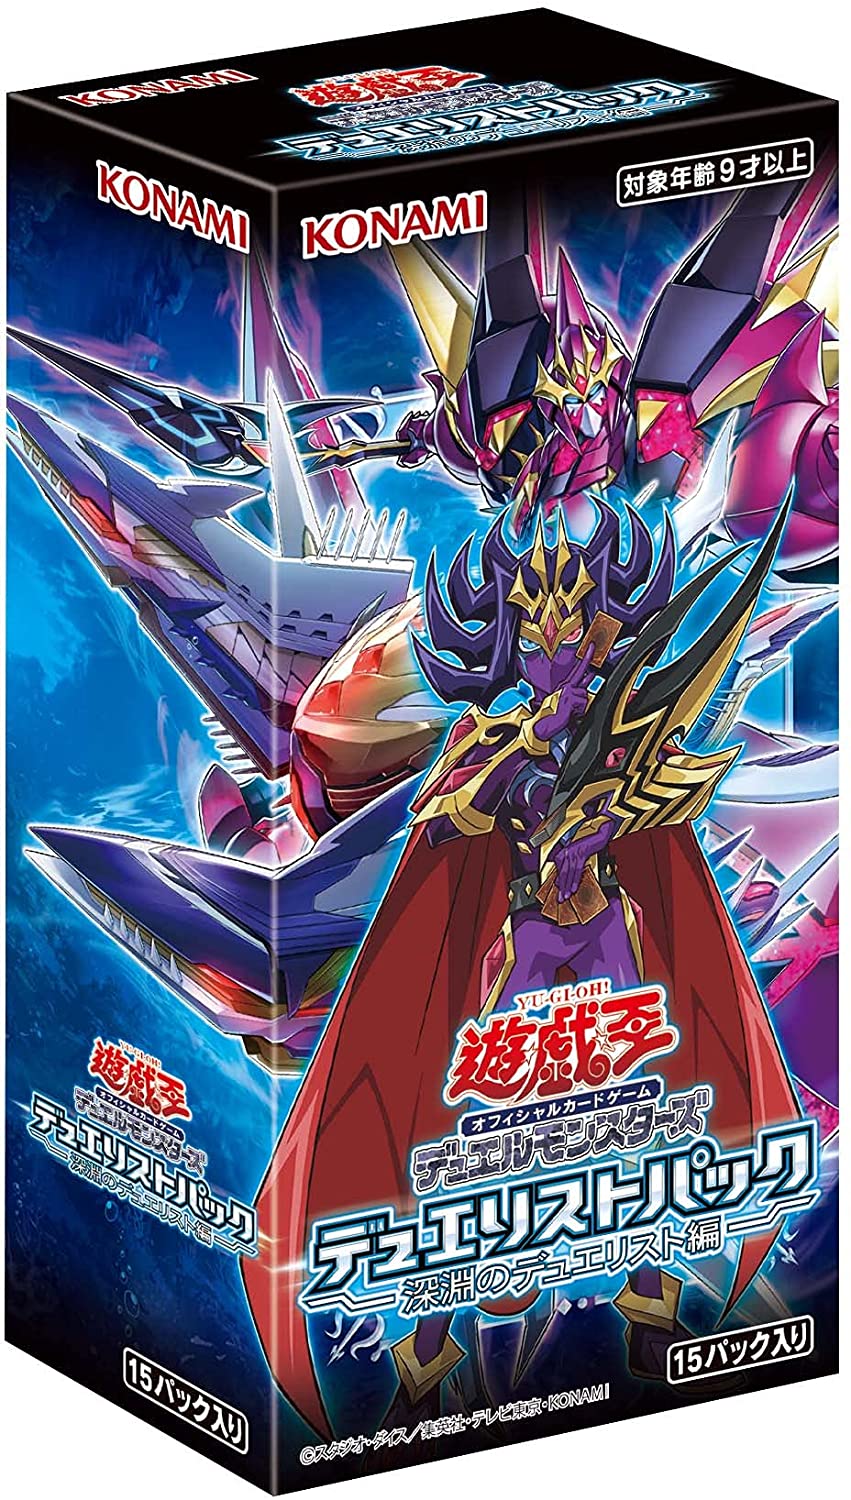 Yu-Gi-Oh! Official Card Game Duel Monsters Deck Build Pack ｢DUELIST OF THE ABYSS｣ Box